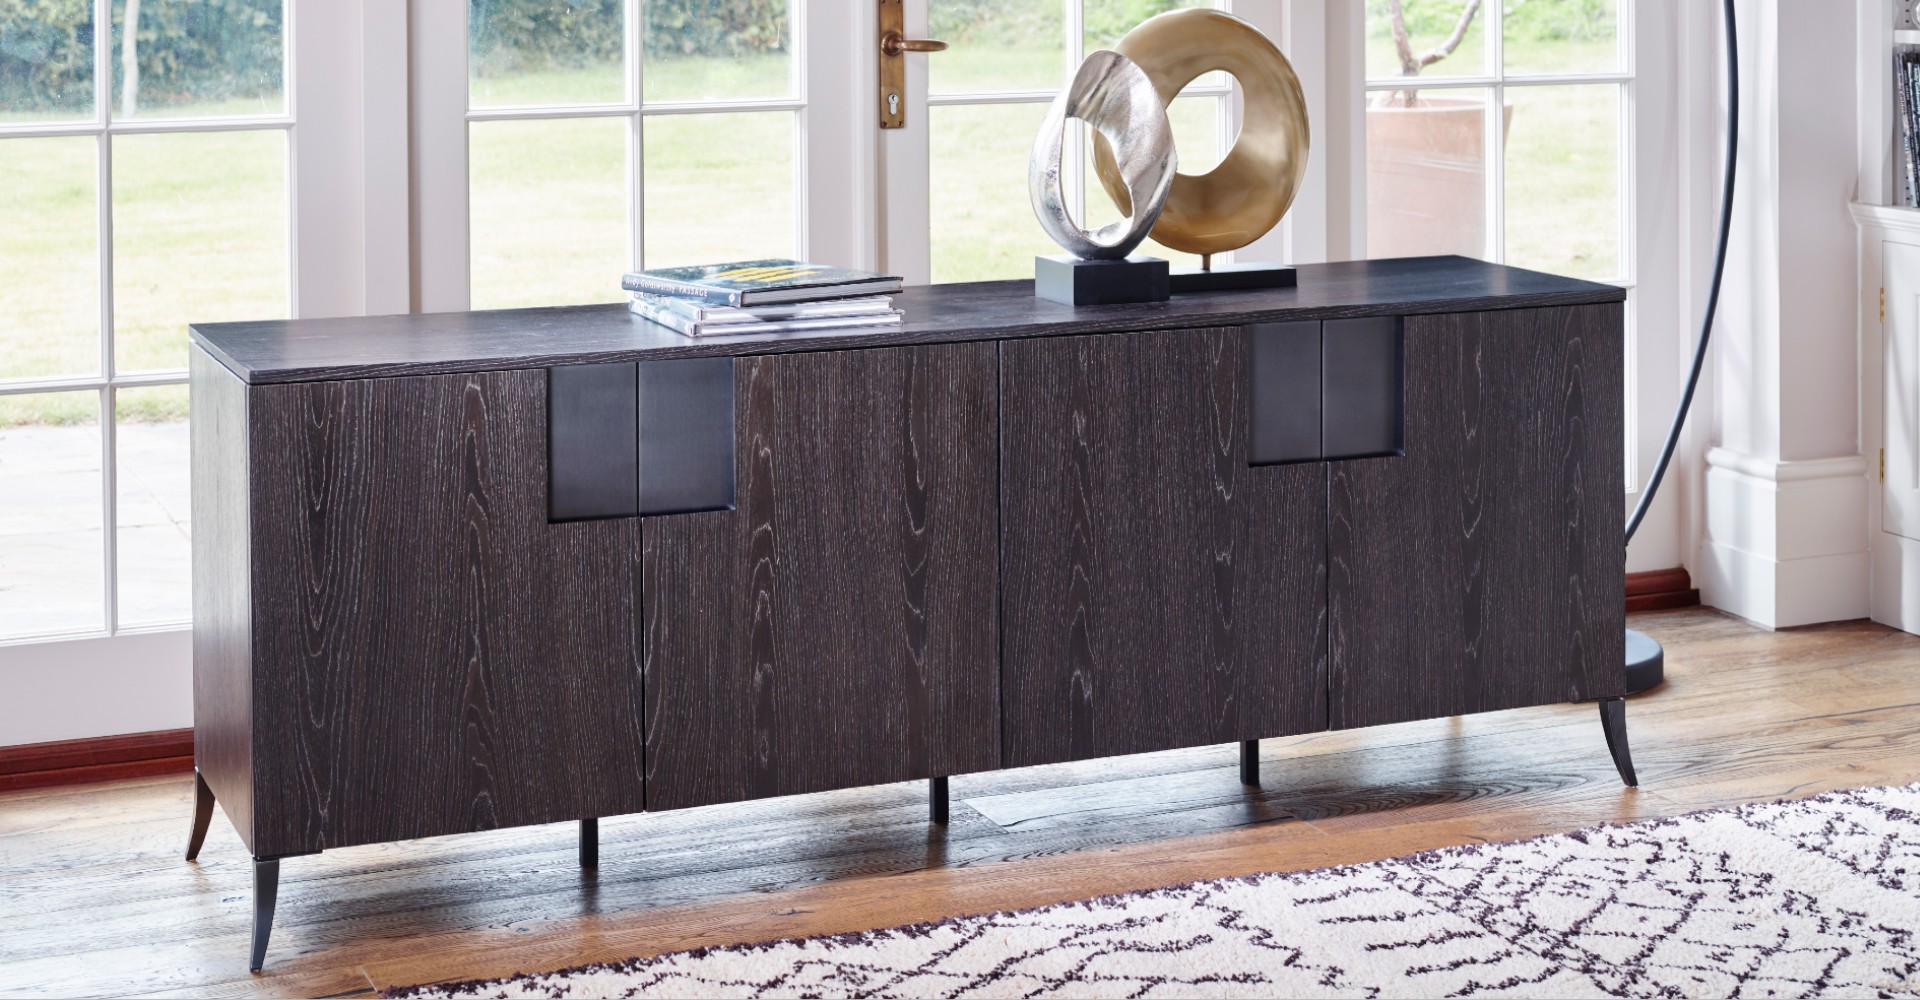 Fitzroy TV Sideboard Double Length by Gillmore © GillmoreSPACE Ltd